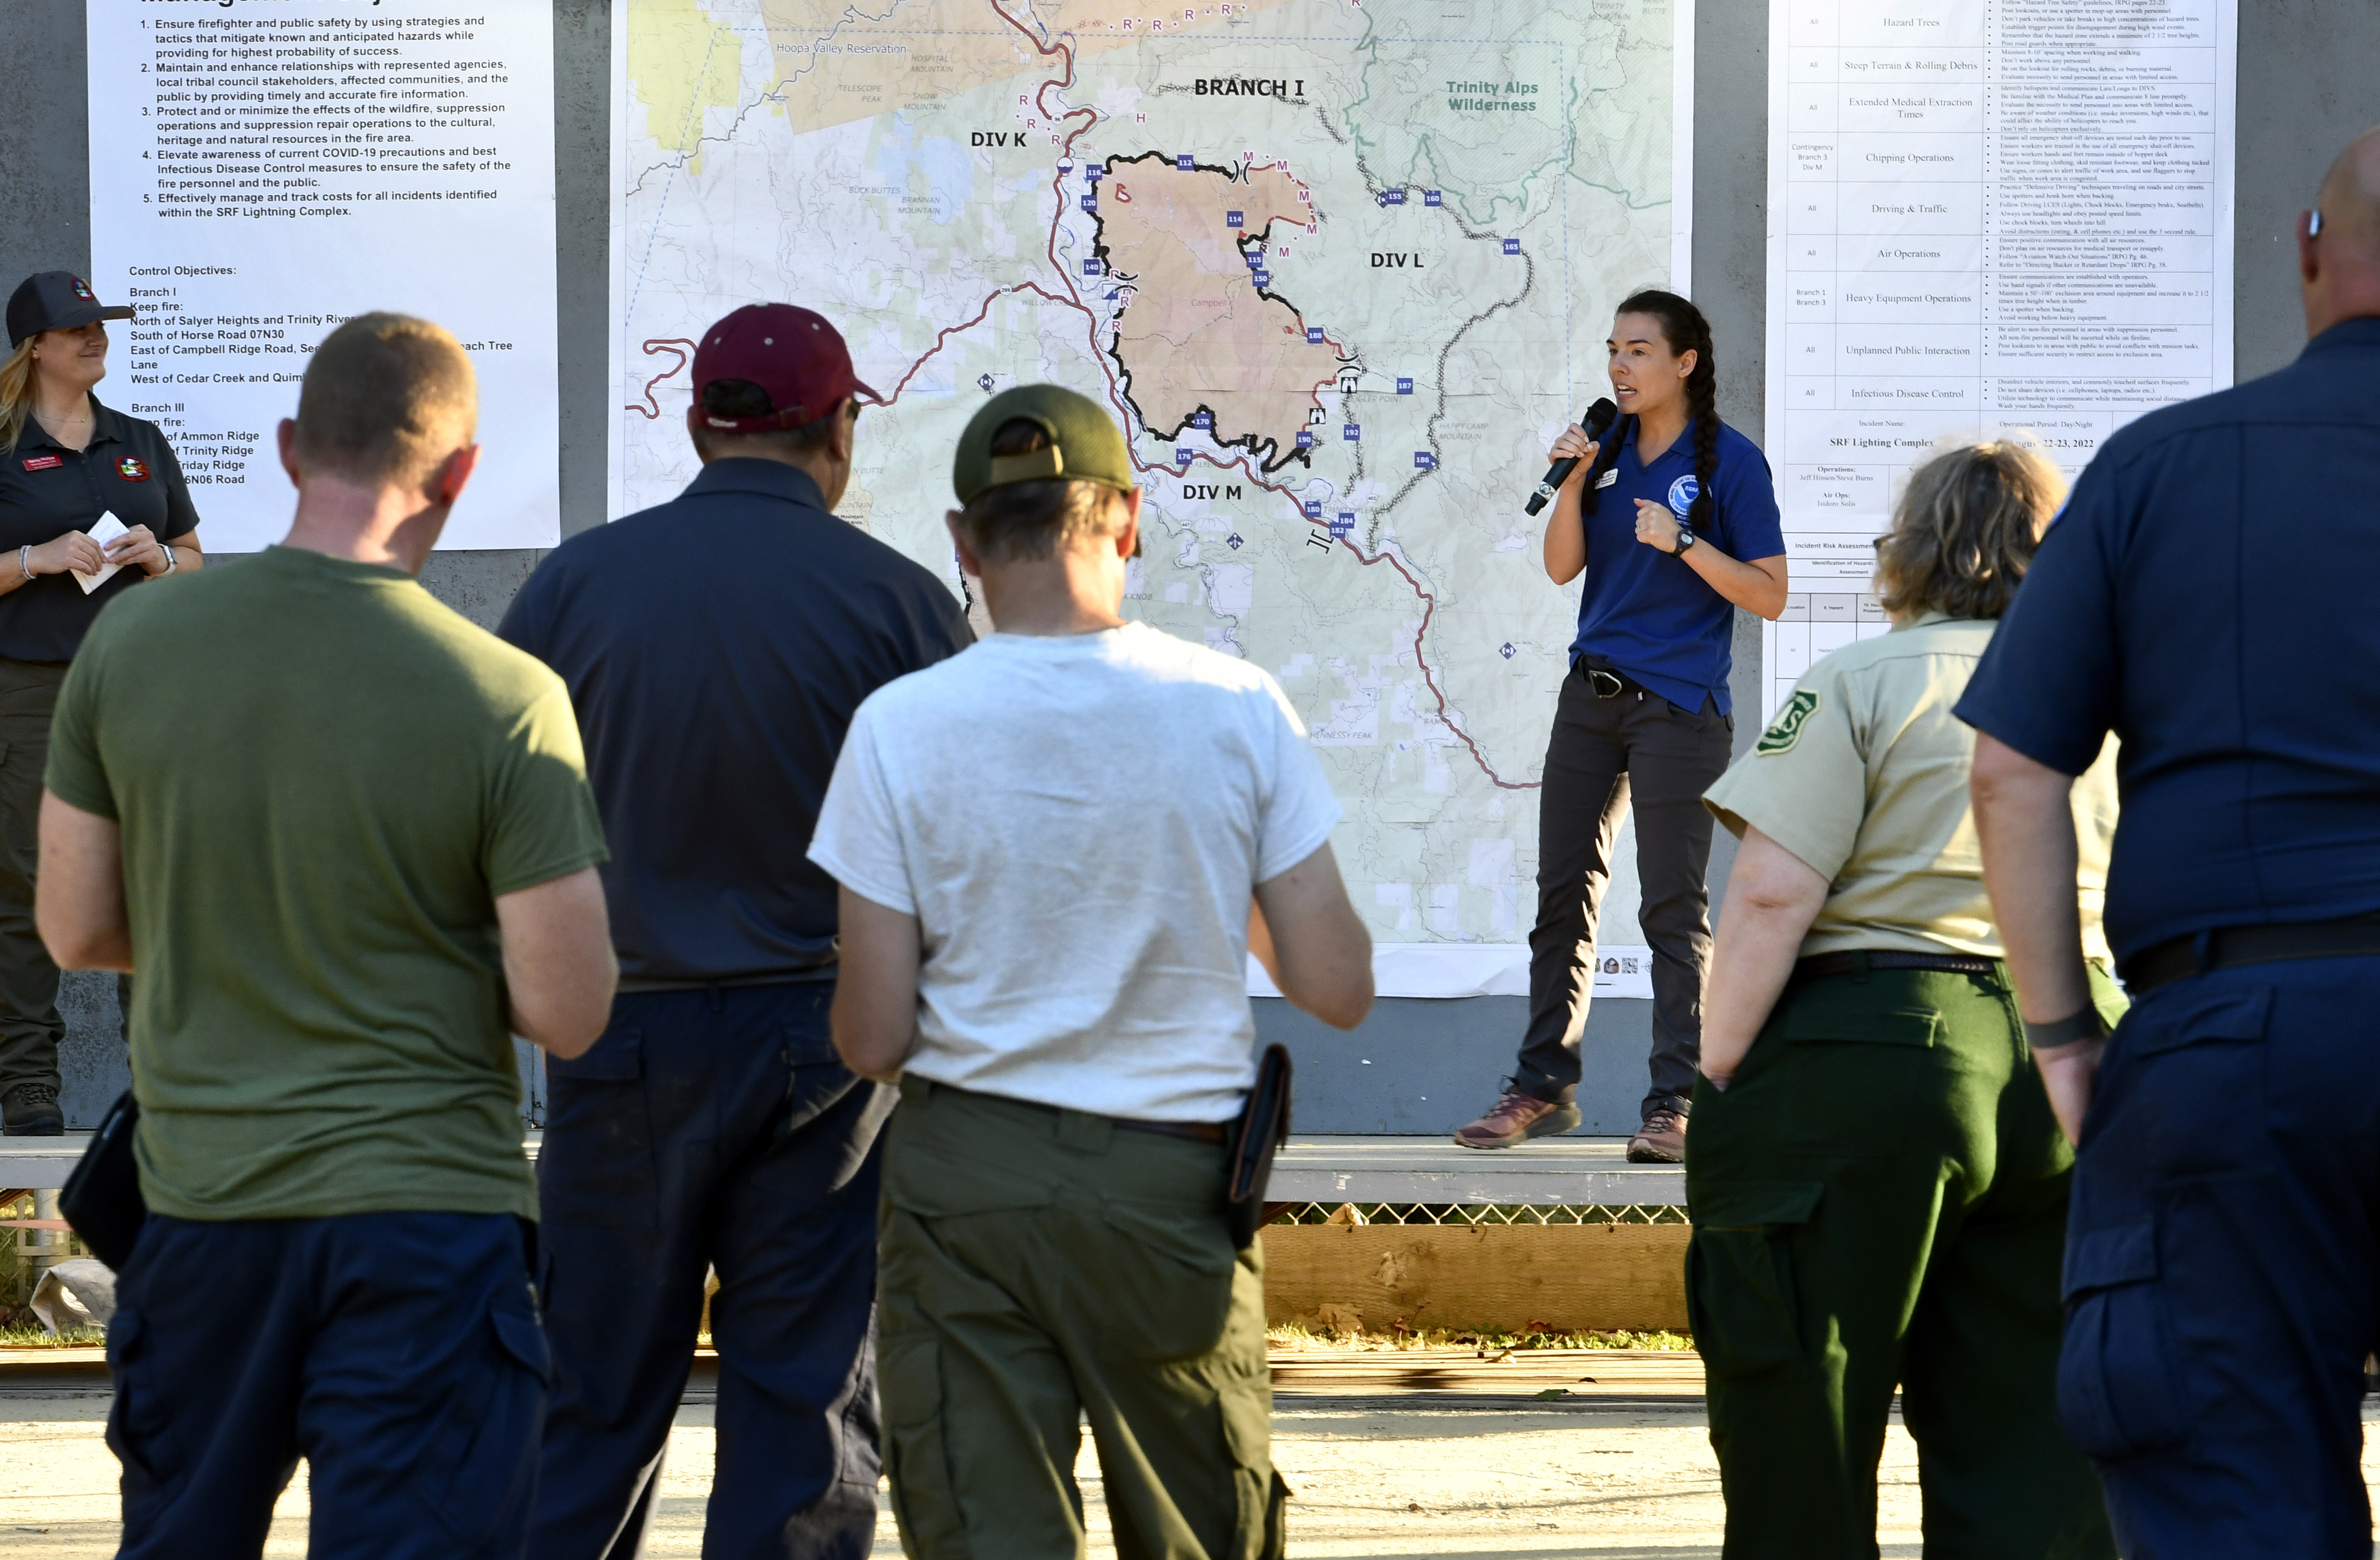 IMET trainee Rebecca Muessle provides an update on weather conditions to fire crews at Six Rivers Lightning Fire in Northern California on August 23, 2022. Credit: Robert Hyatt, NOAA’s National Weather Service.